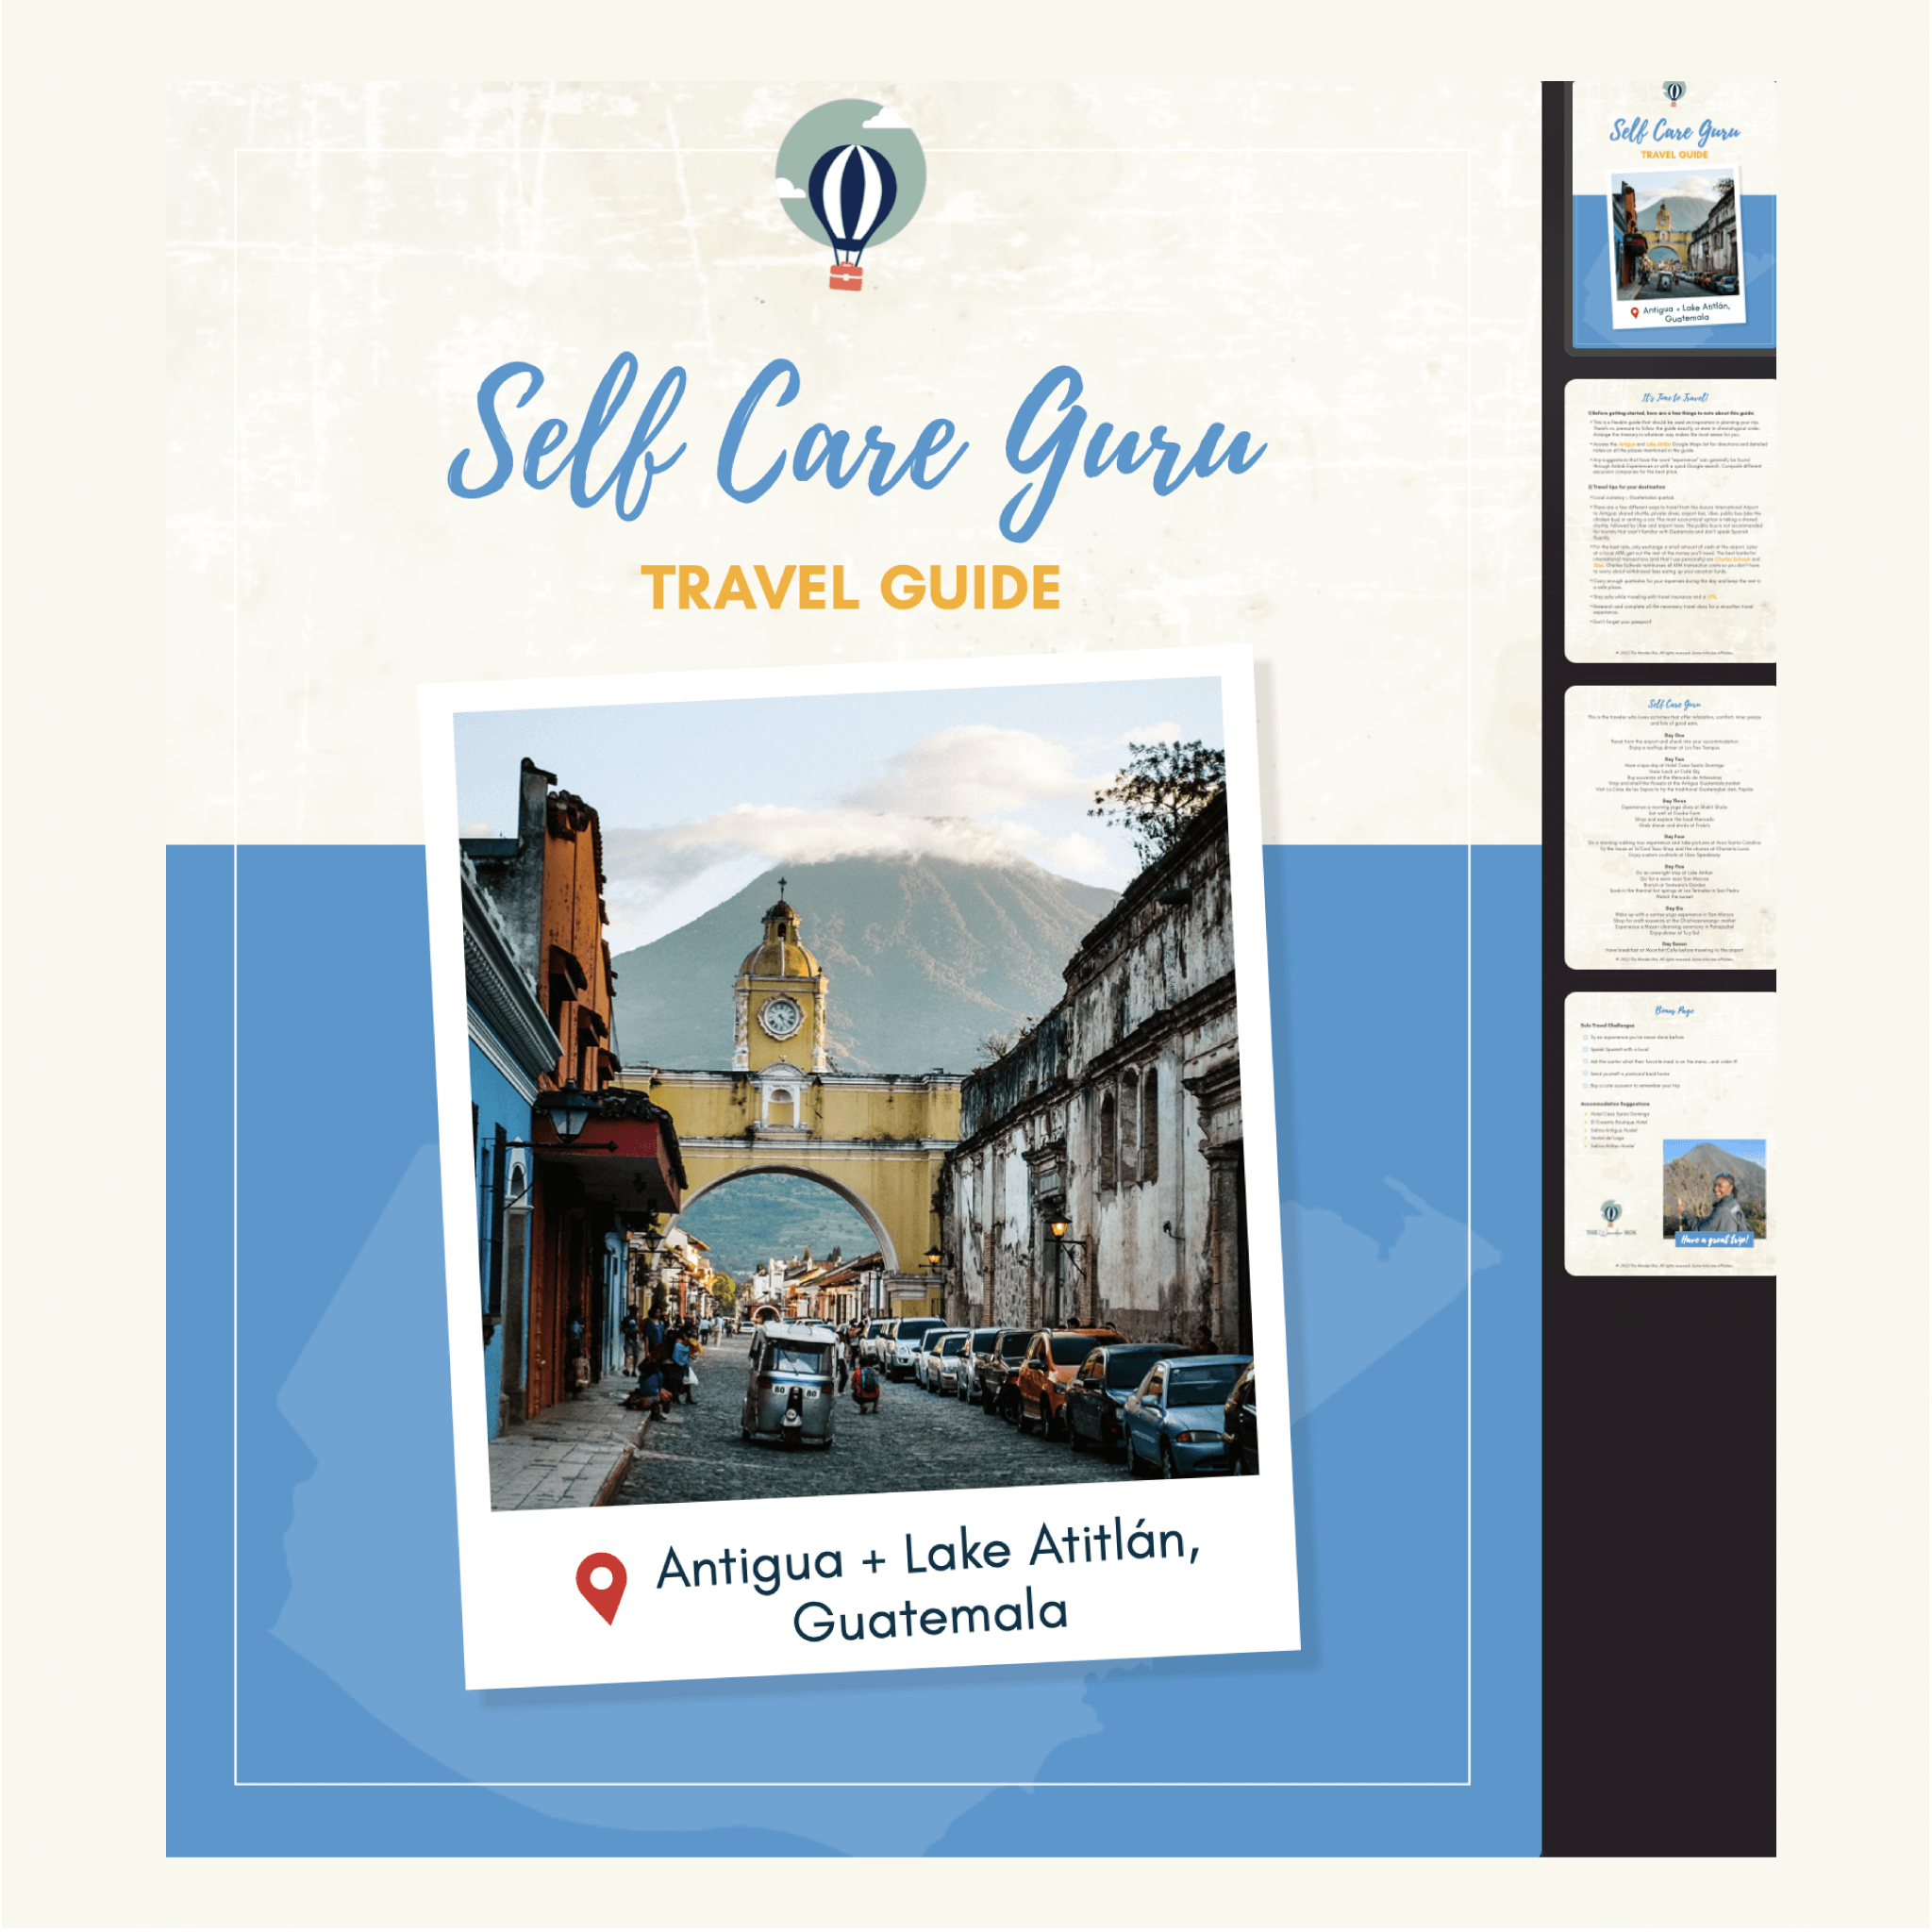 Antigua and Lake Atitlán, Guatemala Travel Itinerary Planner for Self Care Guru, Overview